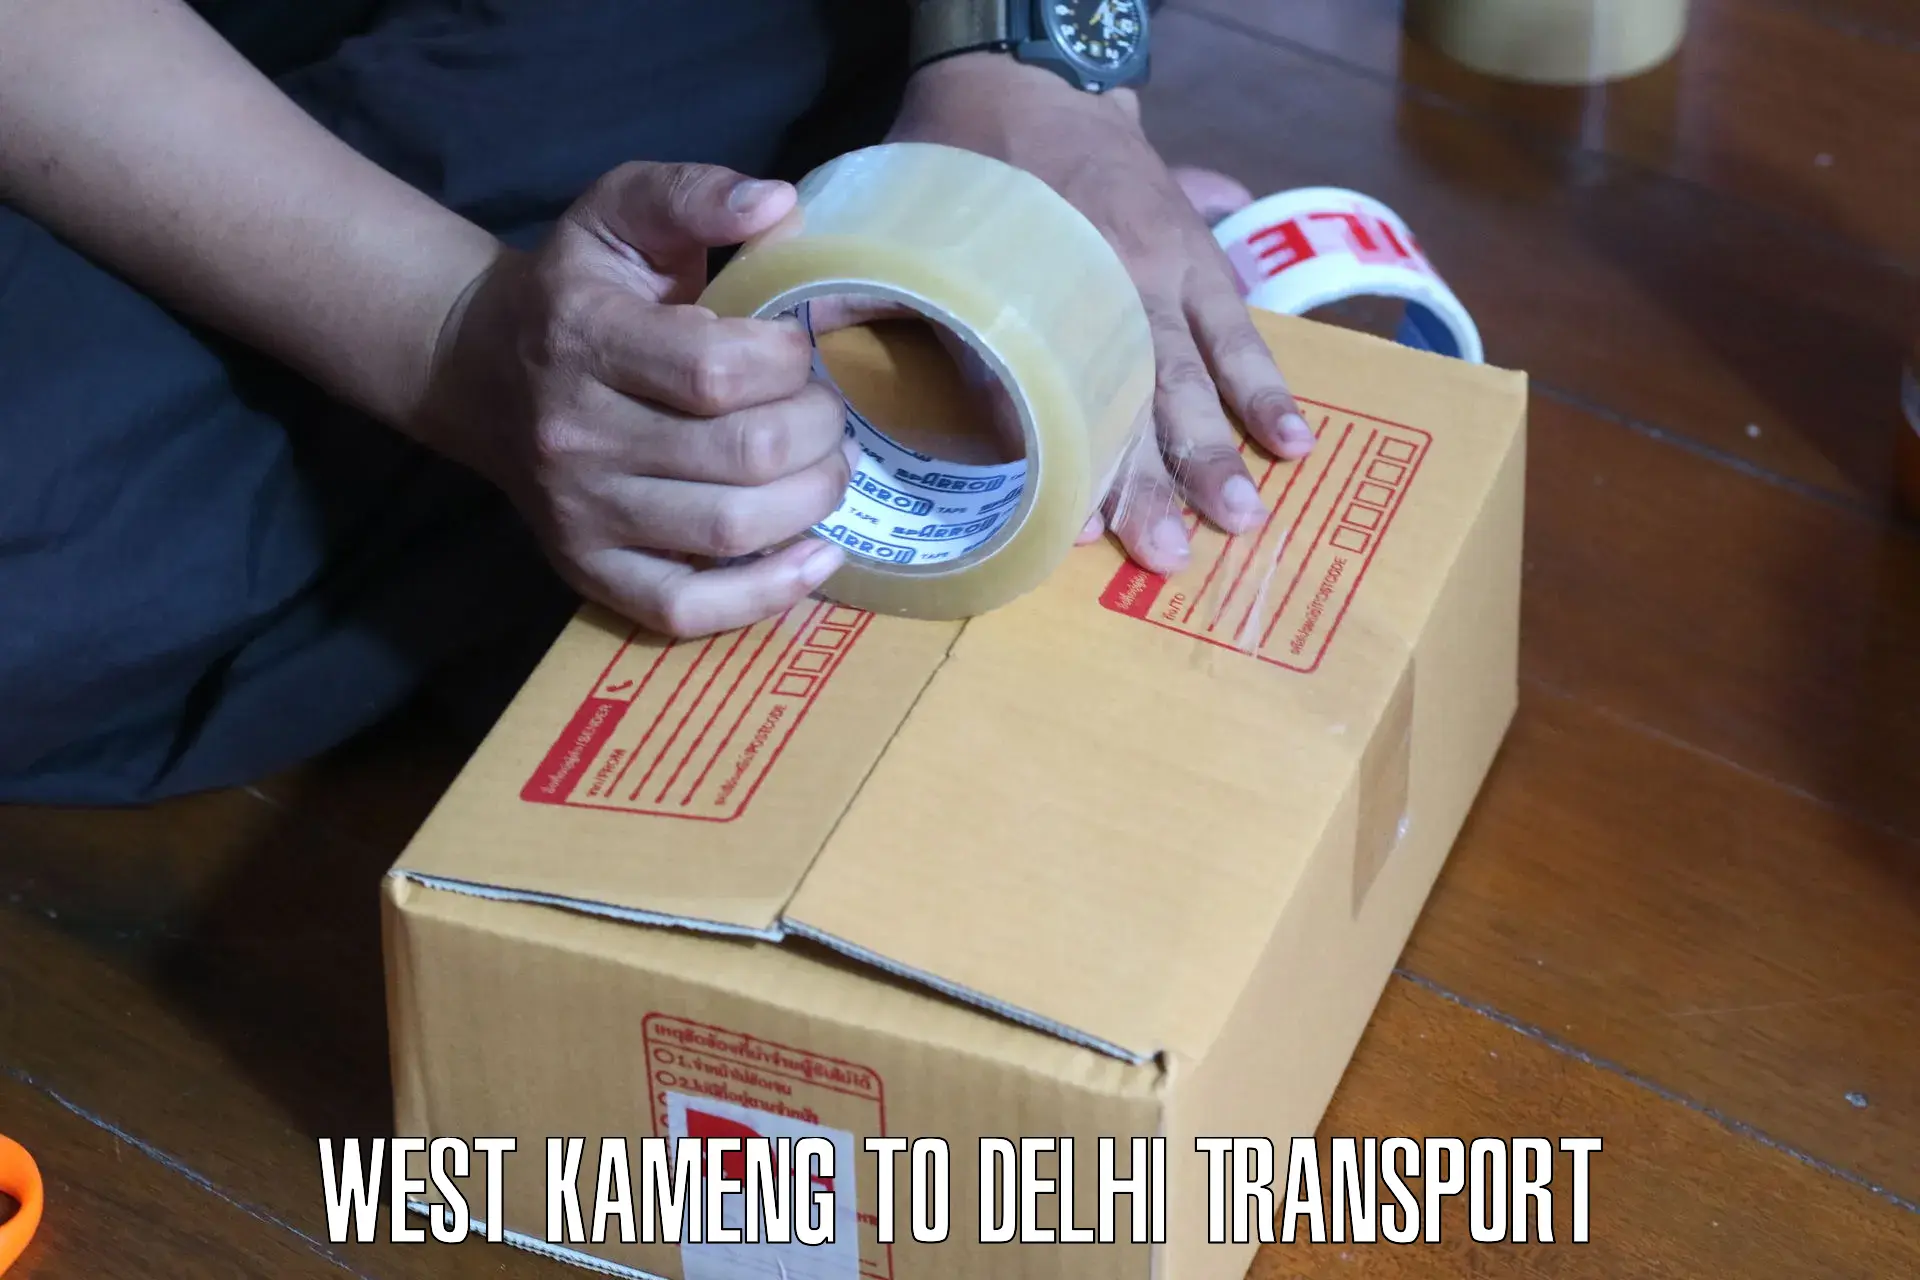 Daily transport service West Kameng to Jhilmil